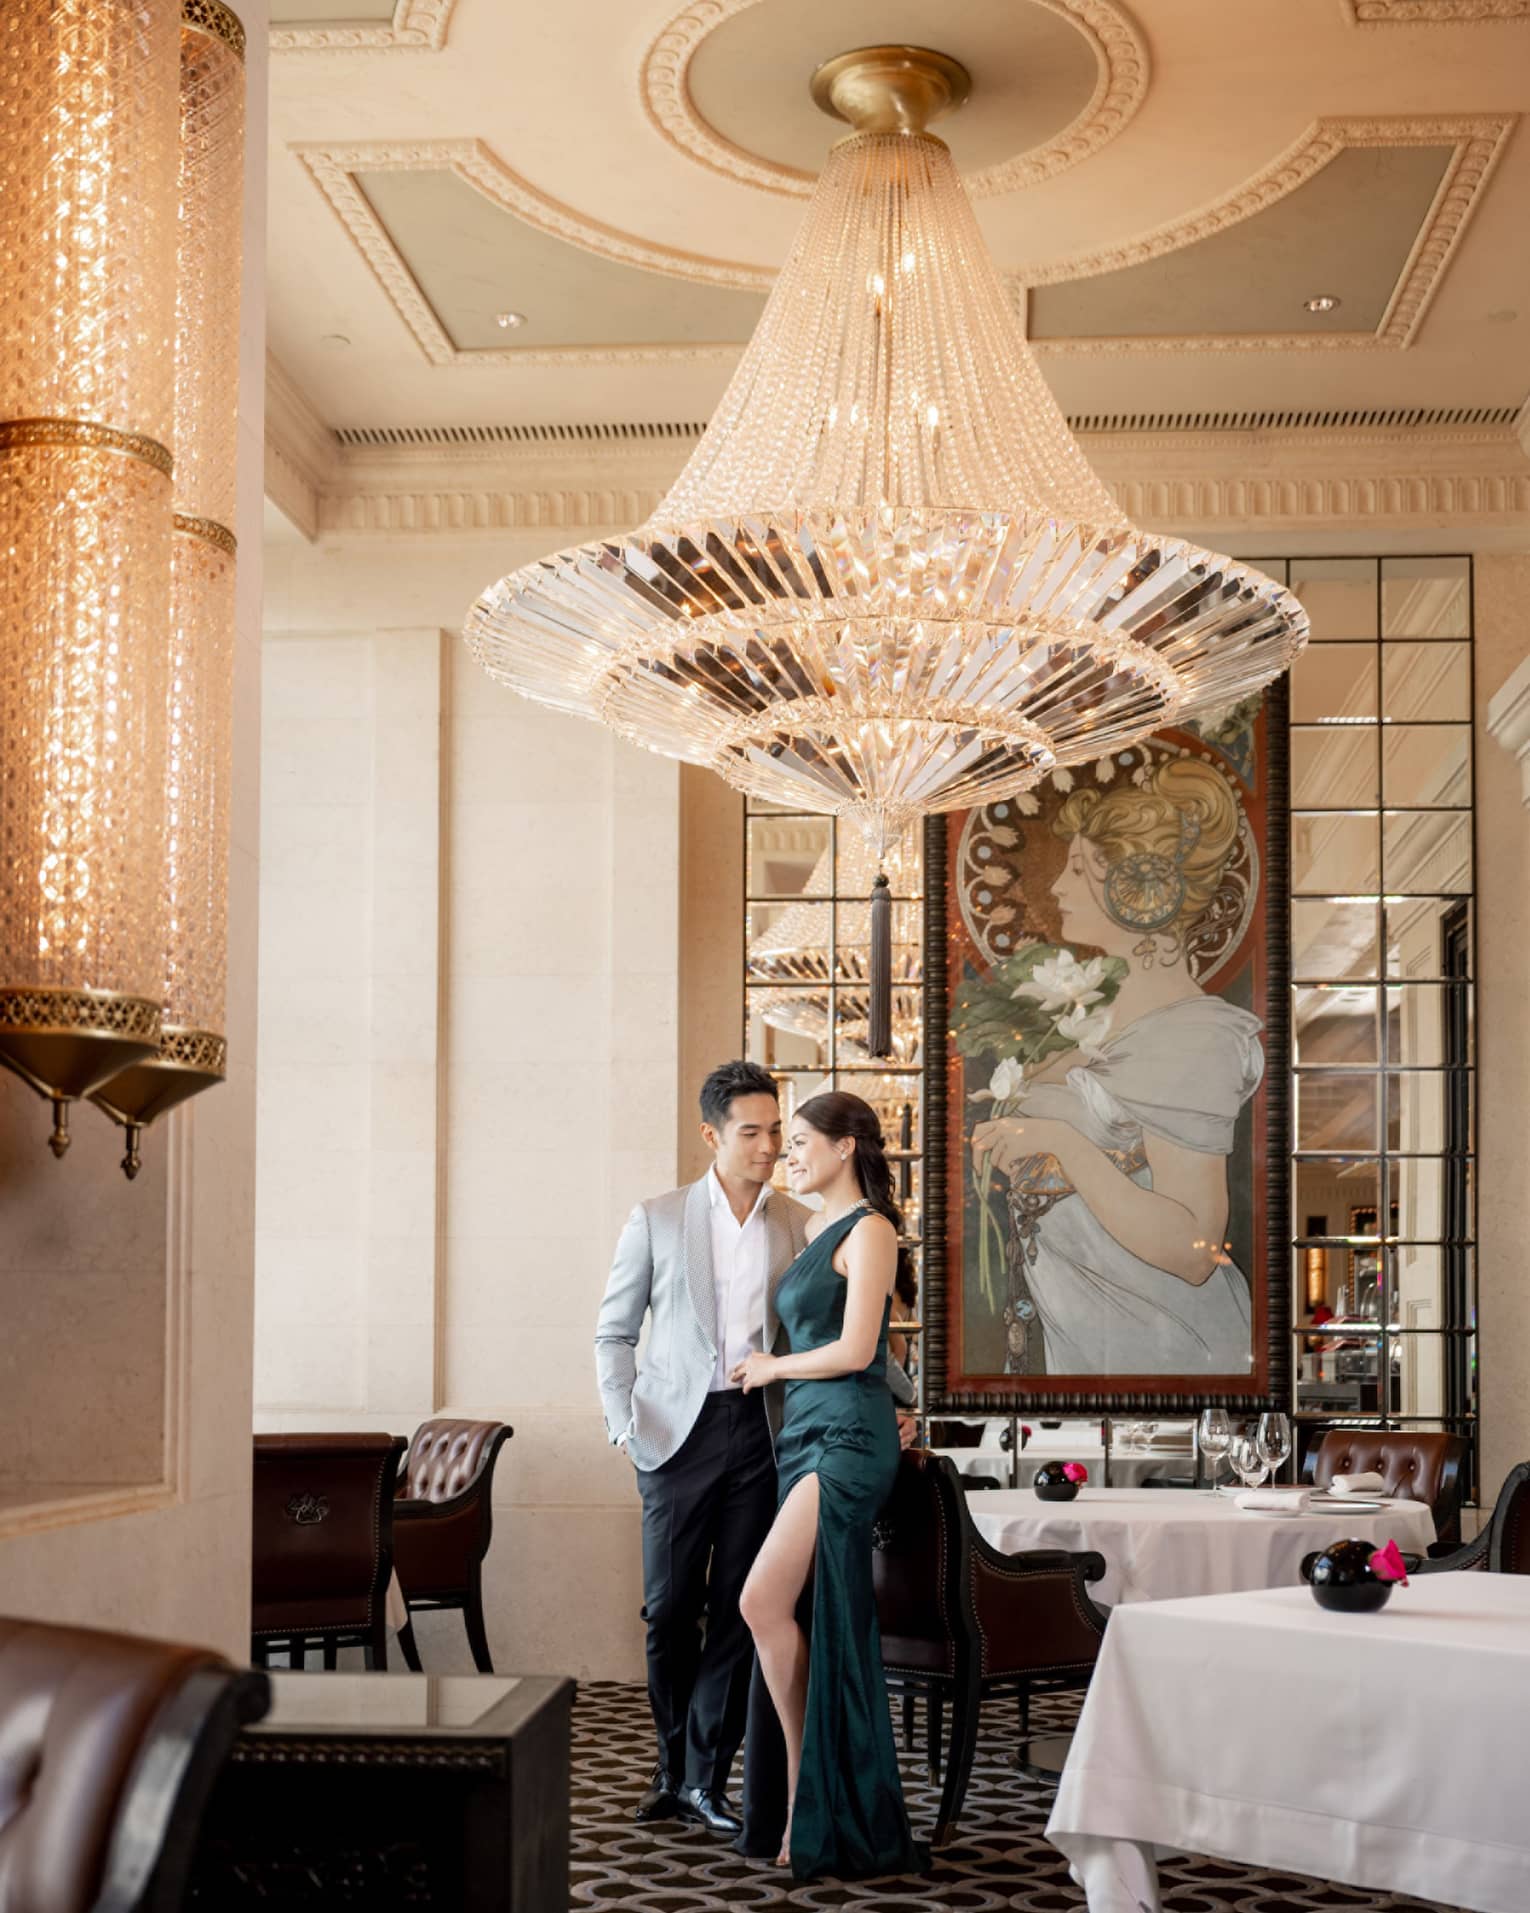 A man and woman in a suit and dress under a large chandelier in a dining outlet.